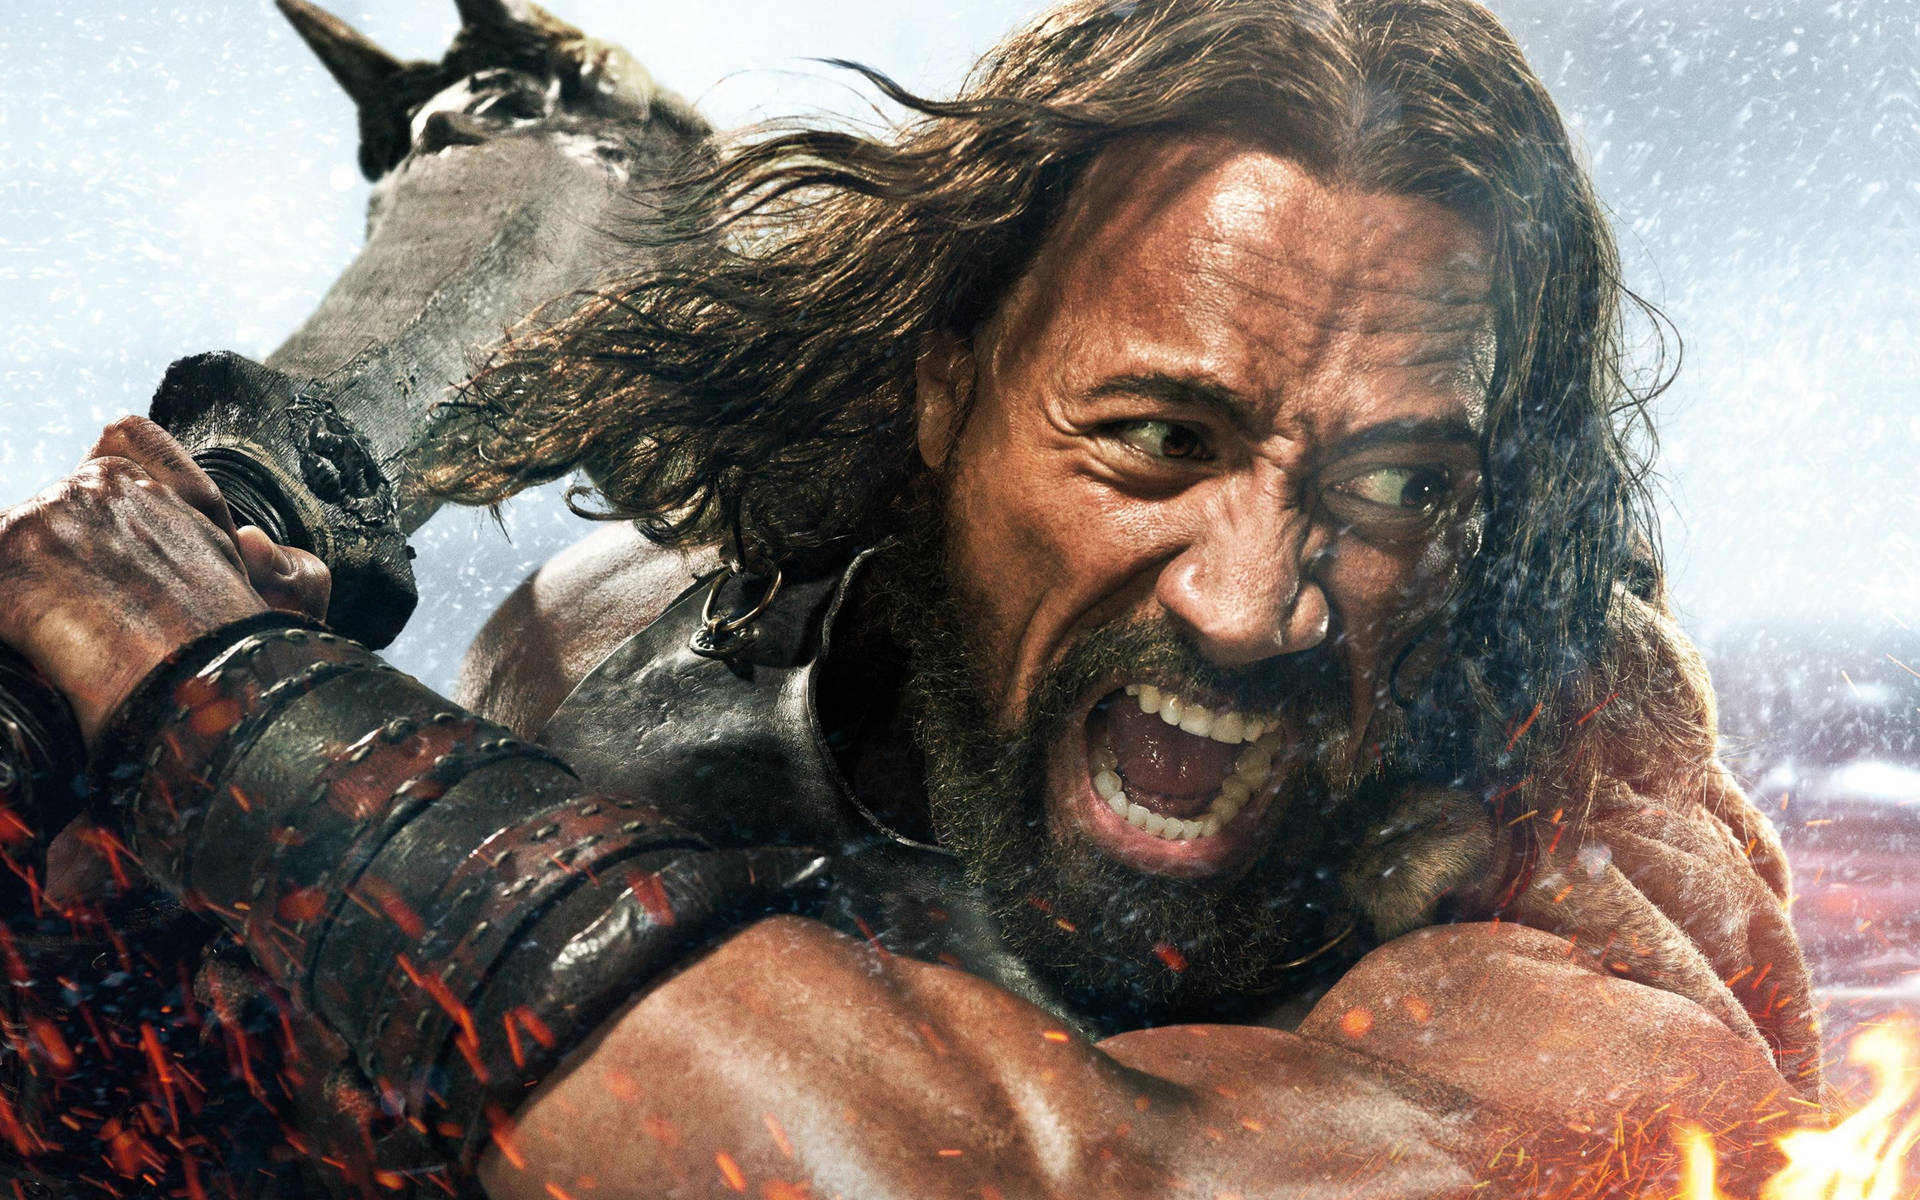 Dwayne Johnson In Character As Hercules, Displaying His Formidable Physique And Intense Expression. Background